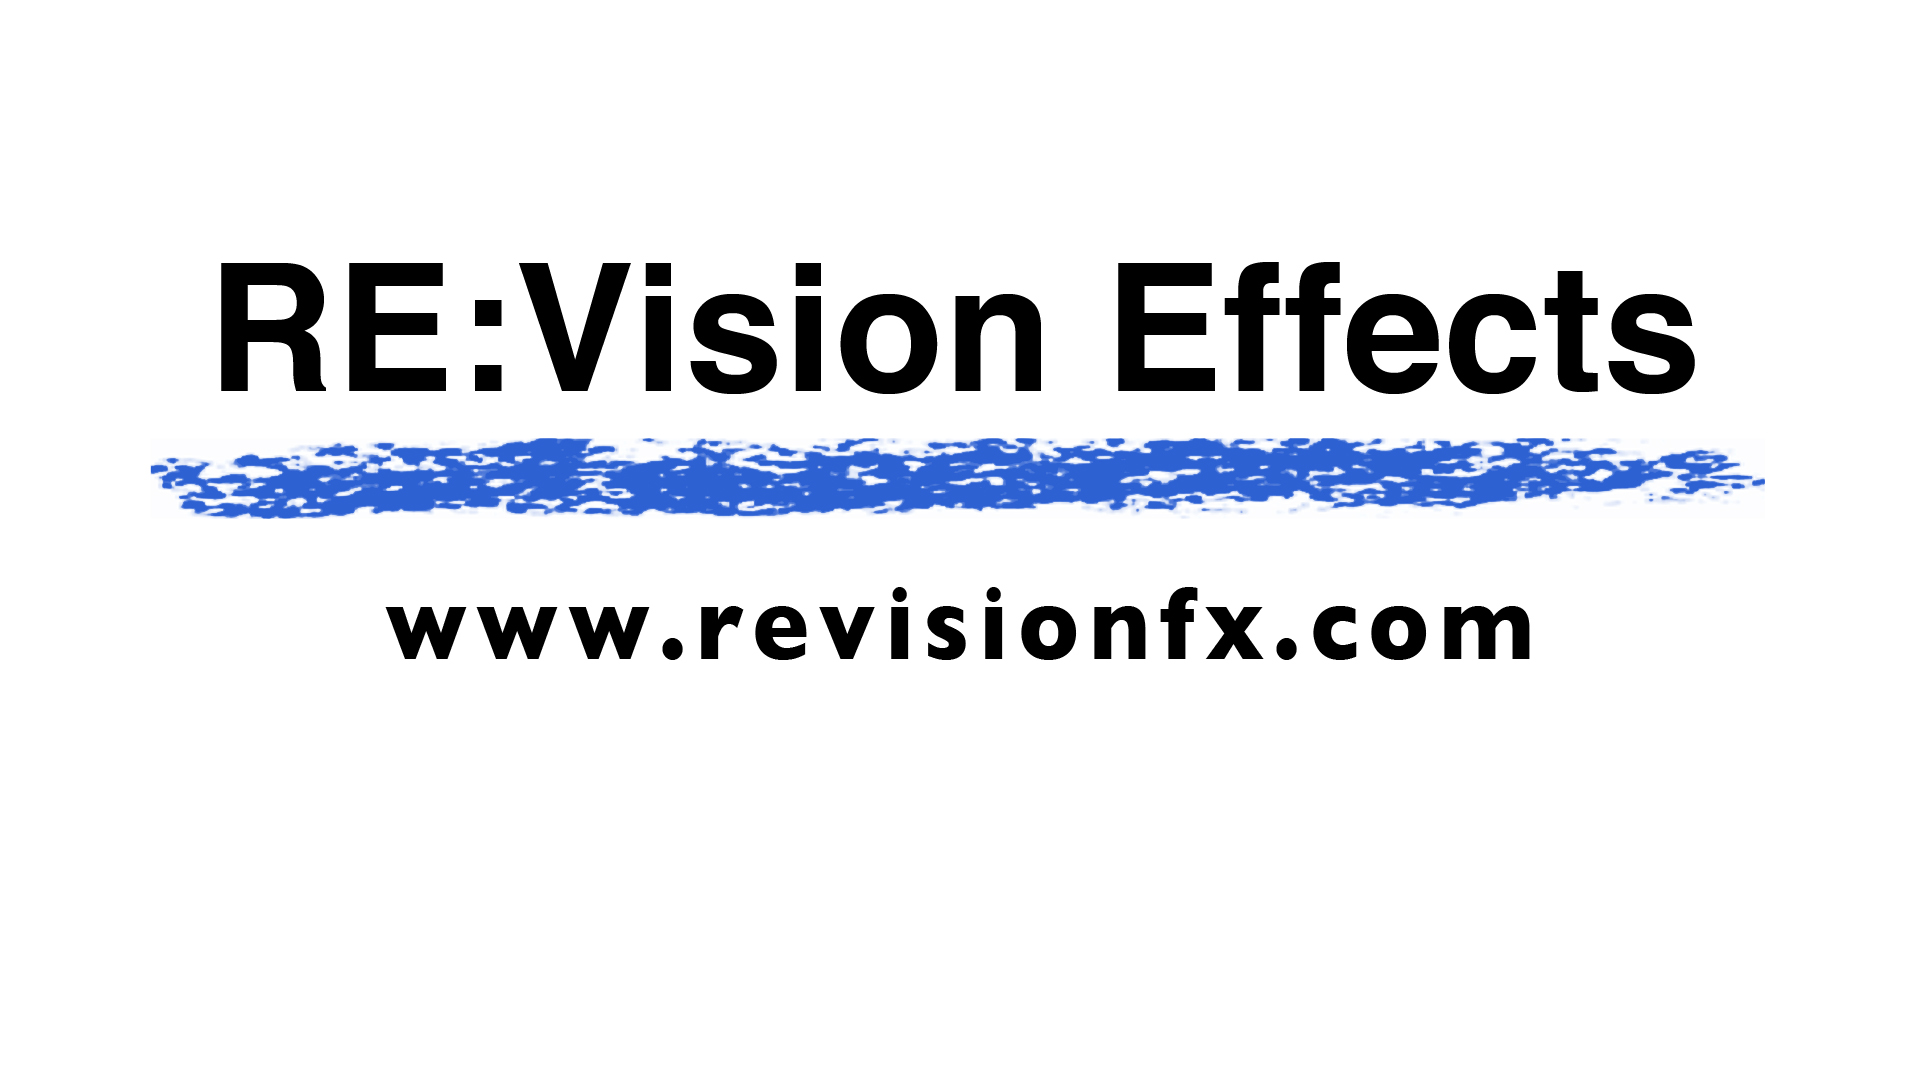 RE:Vision